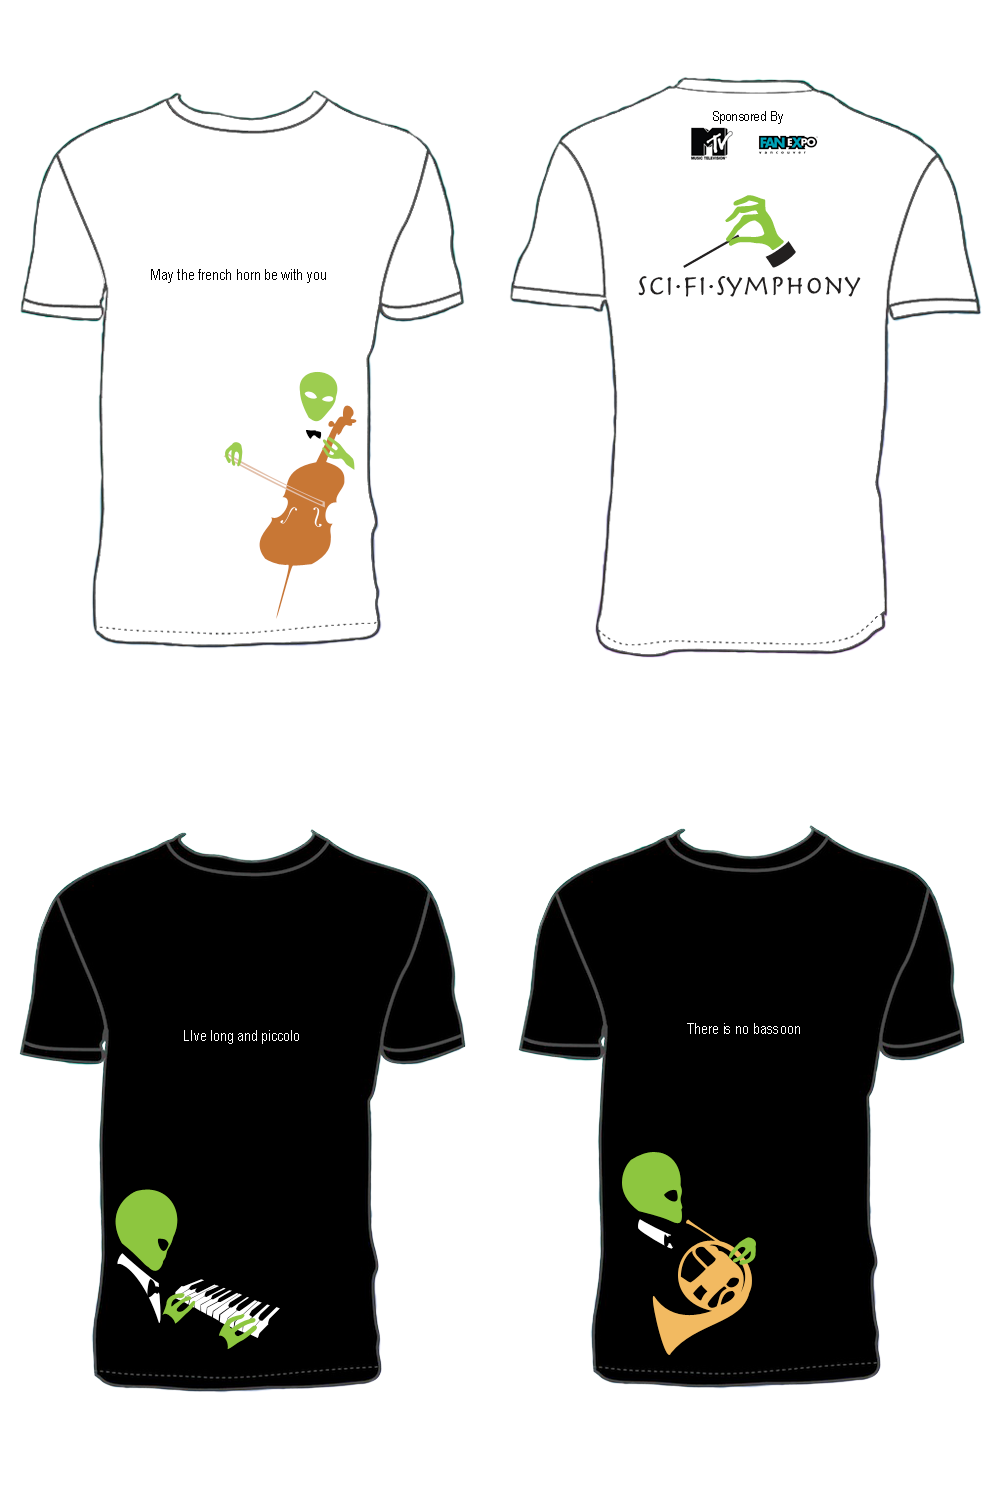 Examples of promotional T-shirts – back and fronts